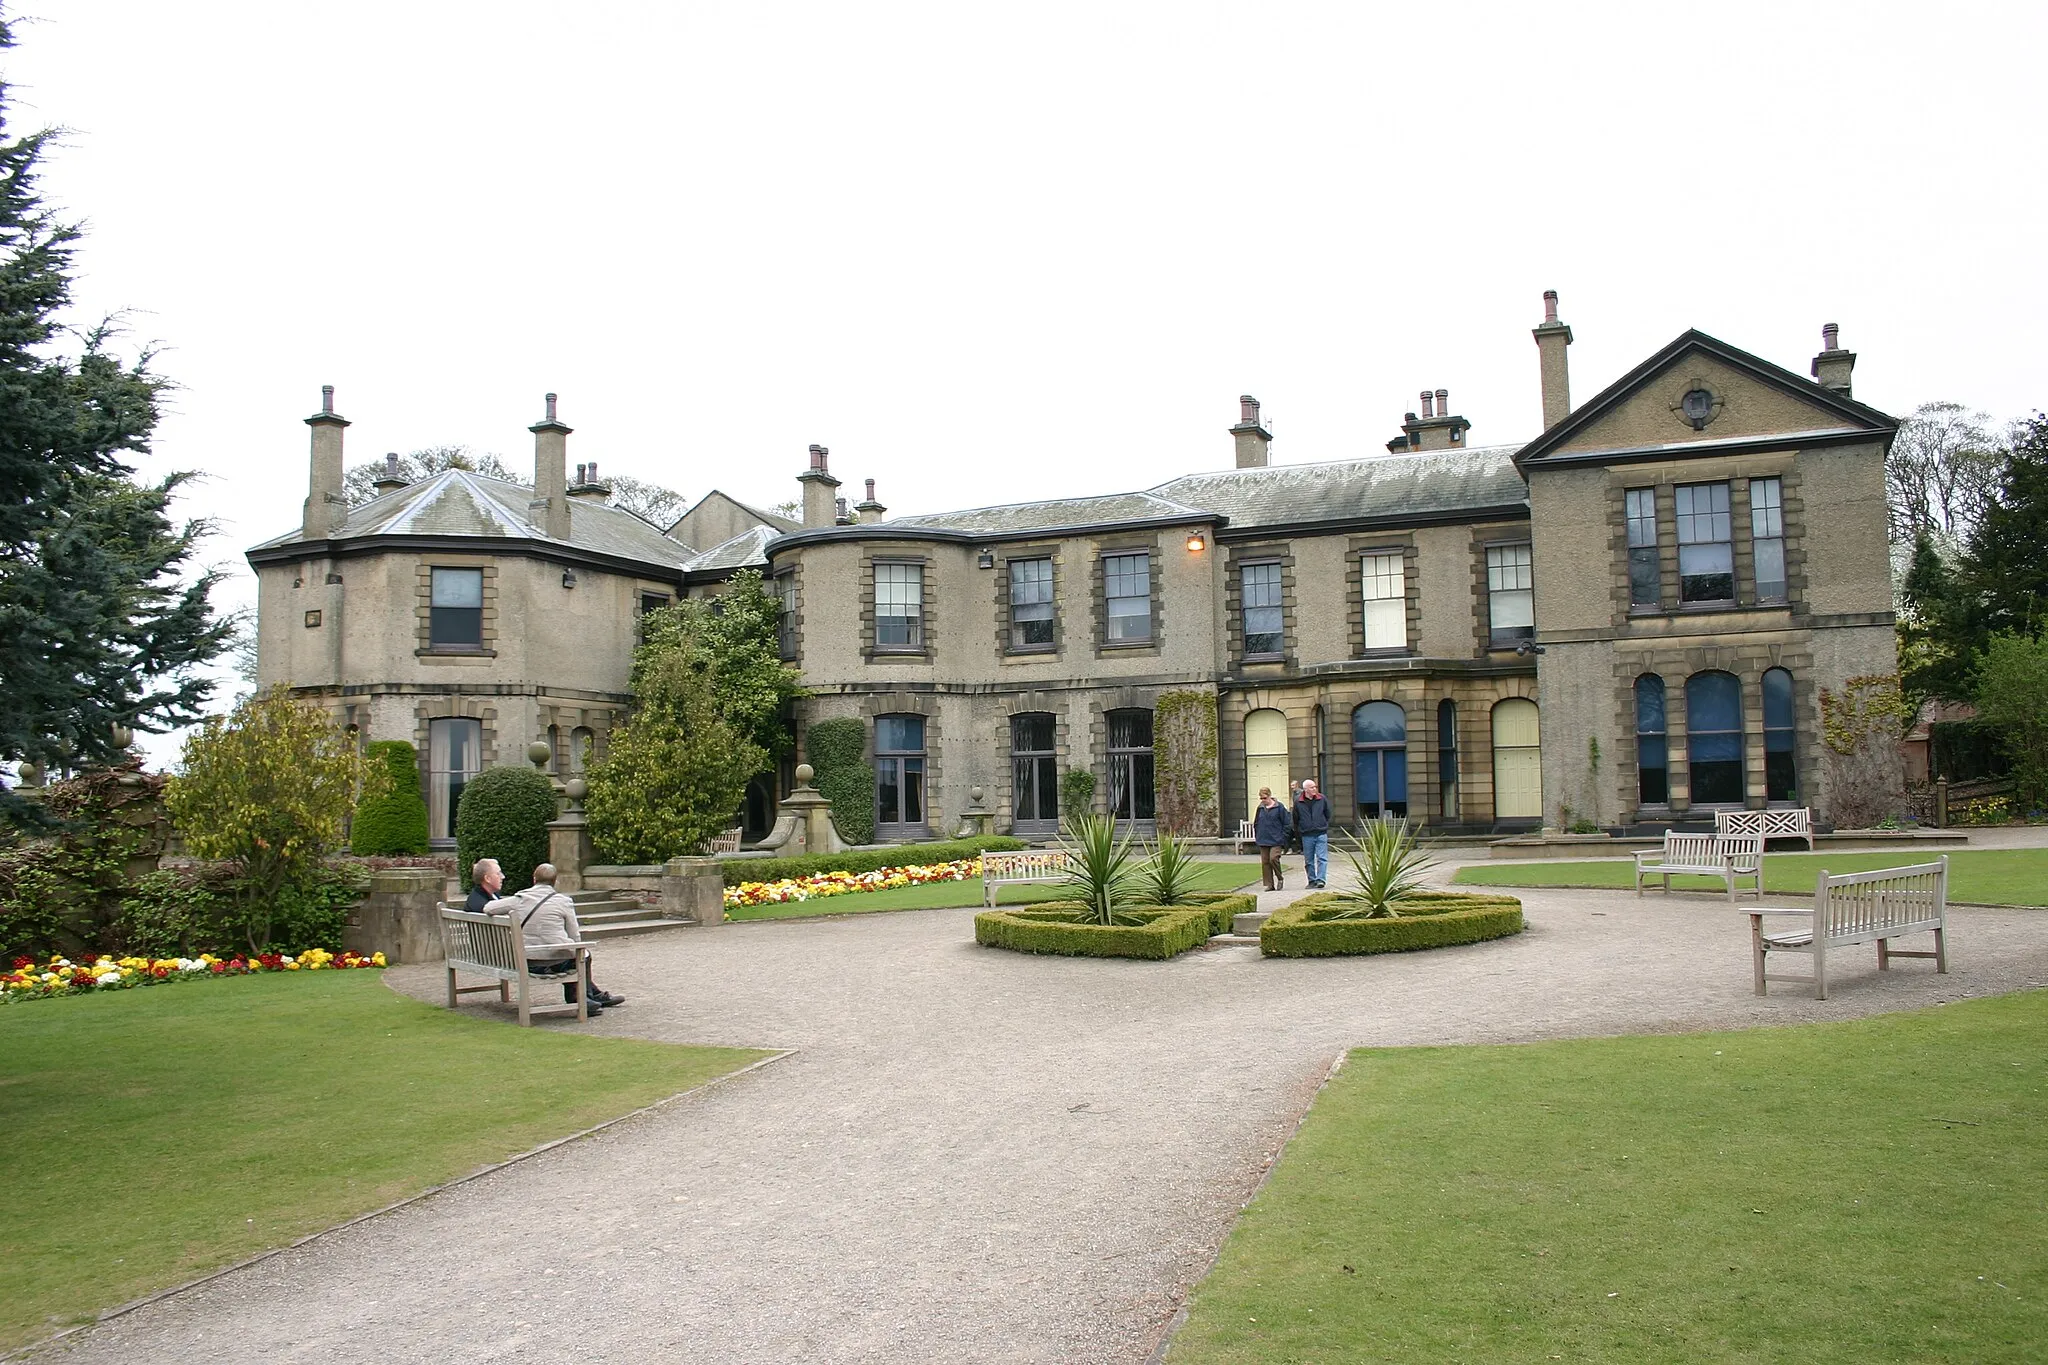 Photo showing: Edwardian era gardens and architecture at Lotherton Hall, Aberford, near Leeds, England.
Lotherton Hall doubled as 'Vernon Lodge' in the Sherock Holmes episode "The Illustrious Client" (1991).